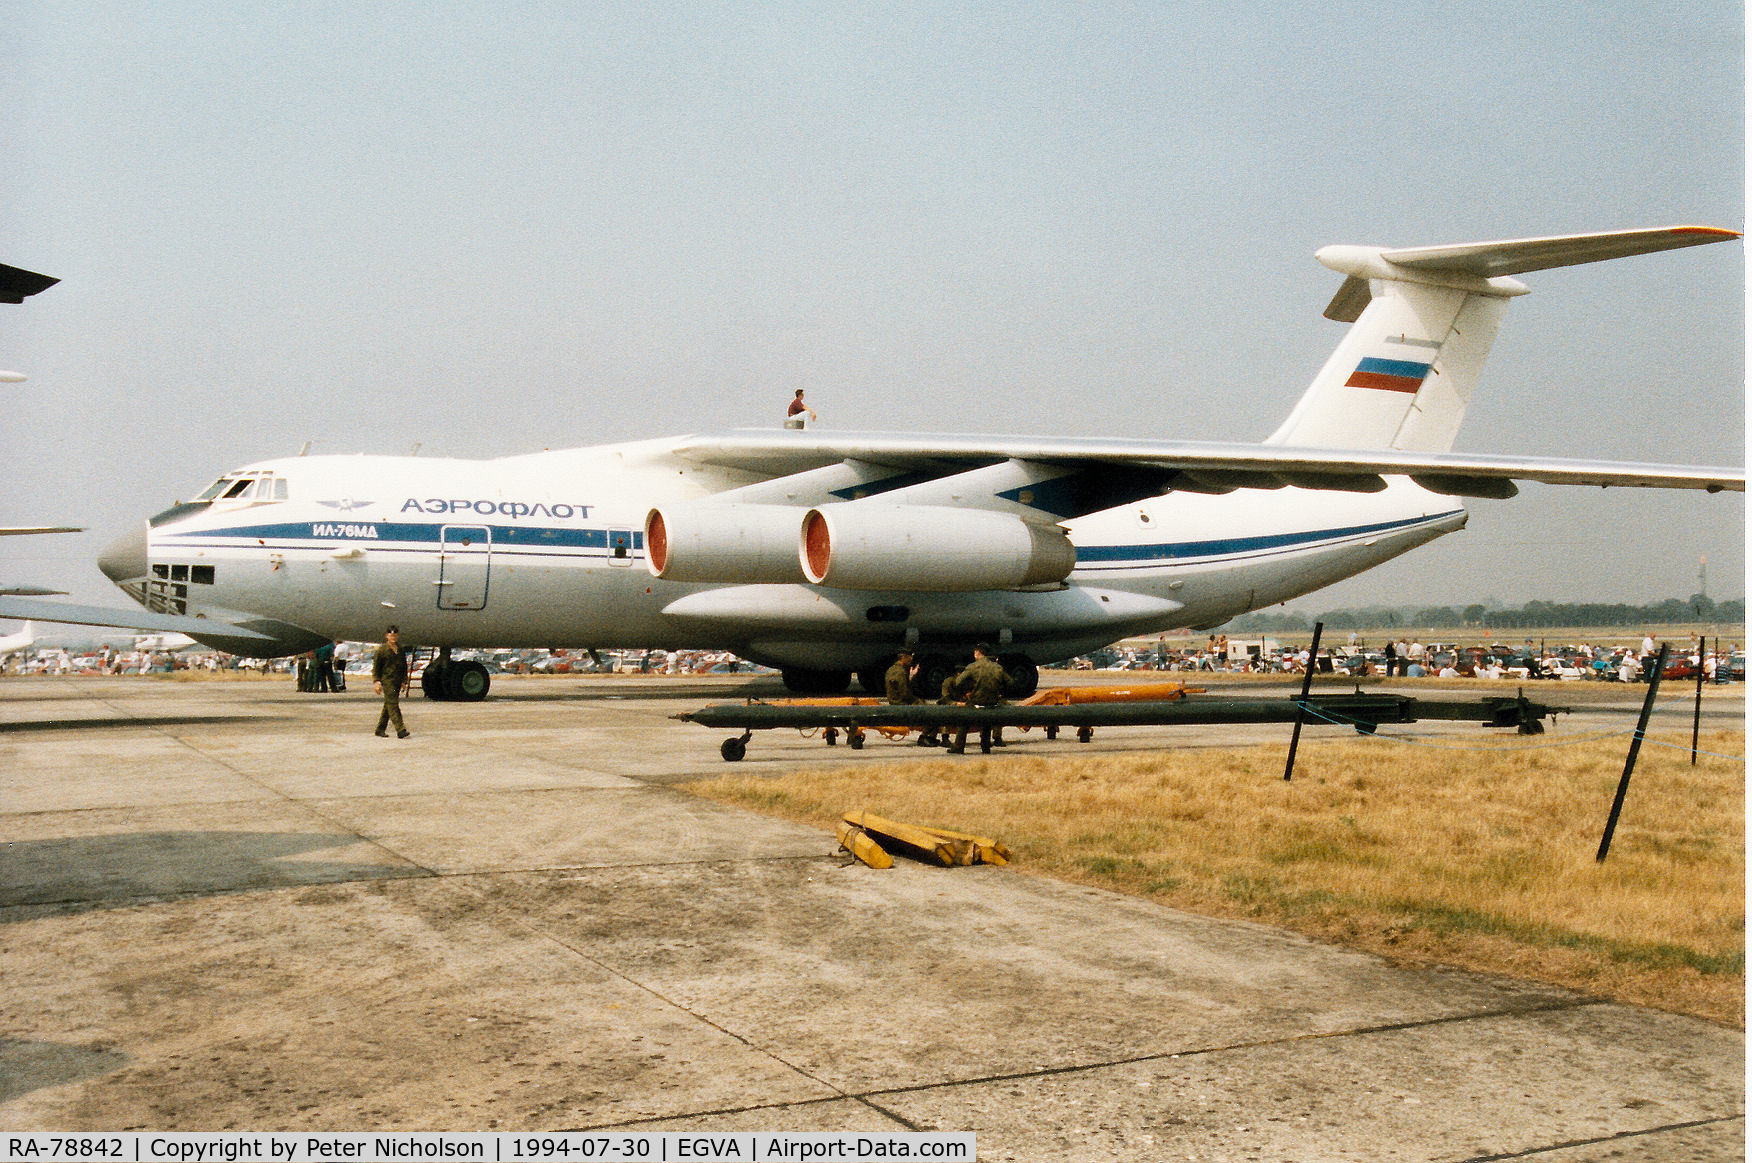 RA-78842, 1990 Ilyushin Il-76MD C/N 1003403069, Il-76MD Candid of Soviet Air Force Military Transport Aviation on display at the 1994 Intnl Air Tattoo at RAF Fairford.